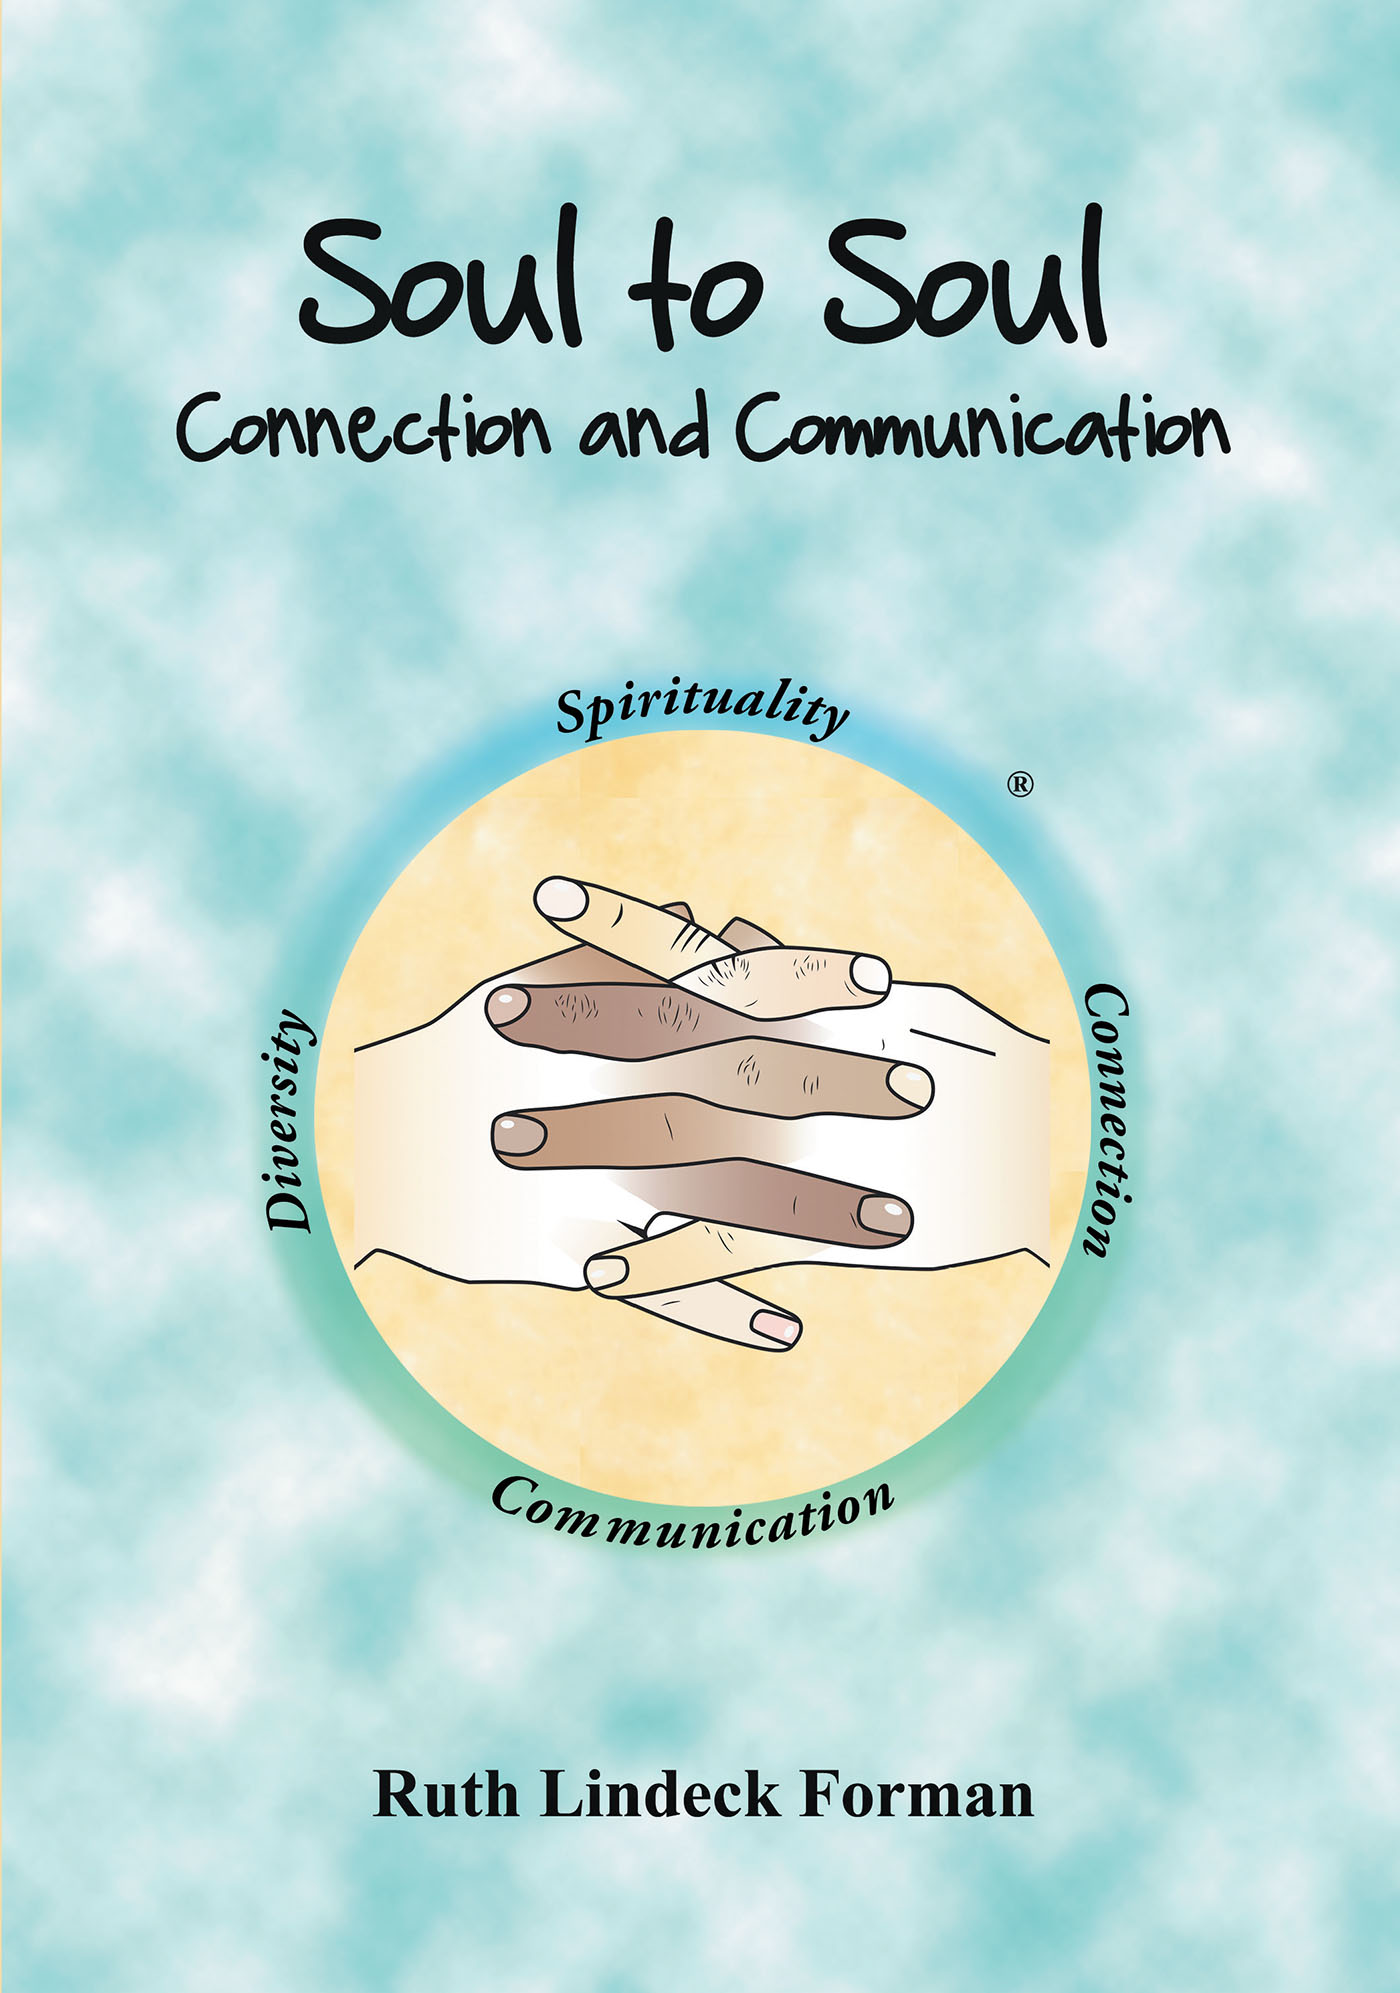 Ruth Lindeck Forman’s New Book, "Soul to Soul: Connection and Communication," is an Enlightening Guide to Connecting with the World and Individual Communities